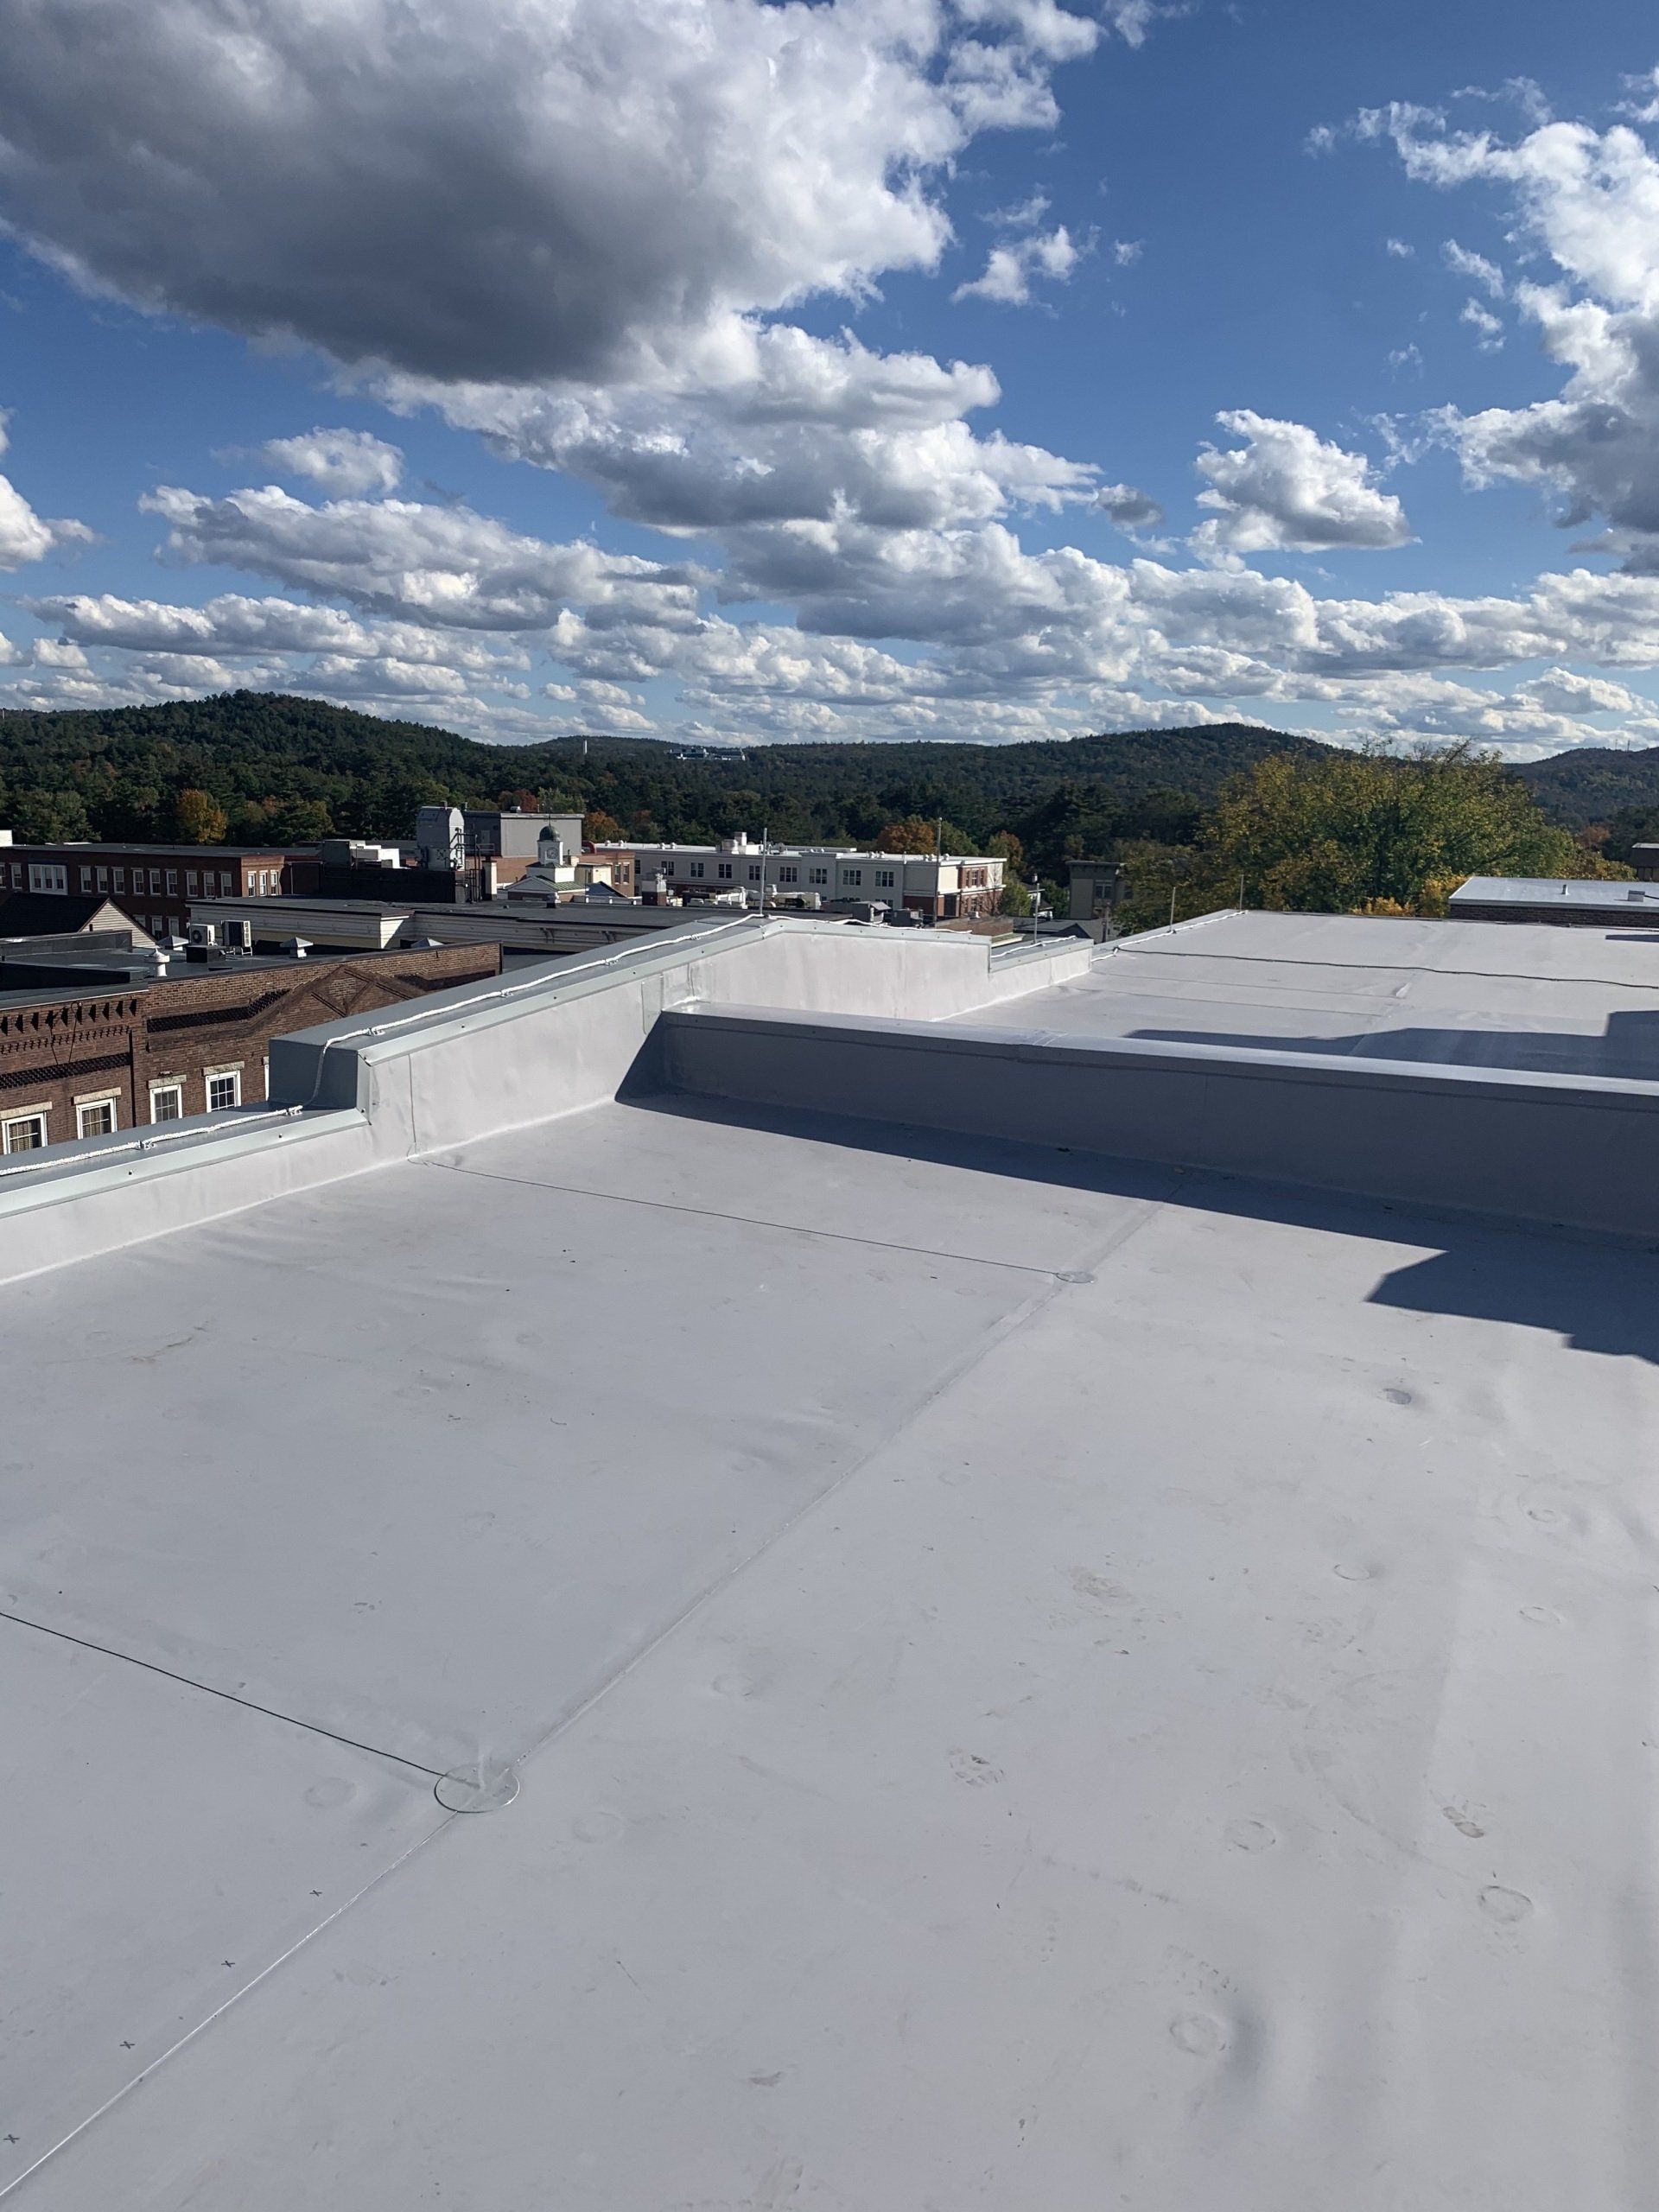 A commercial flat roof maintained by Rodd Roofing in the Northeast Kingdom of Vermont